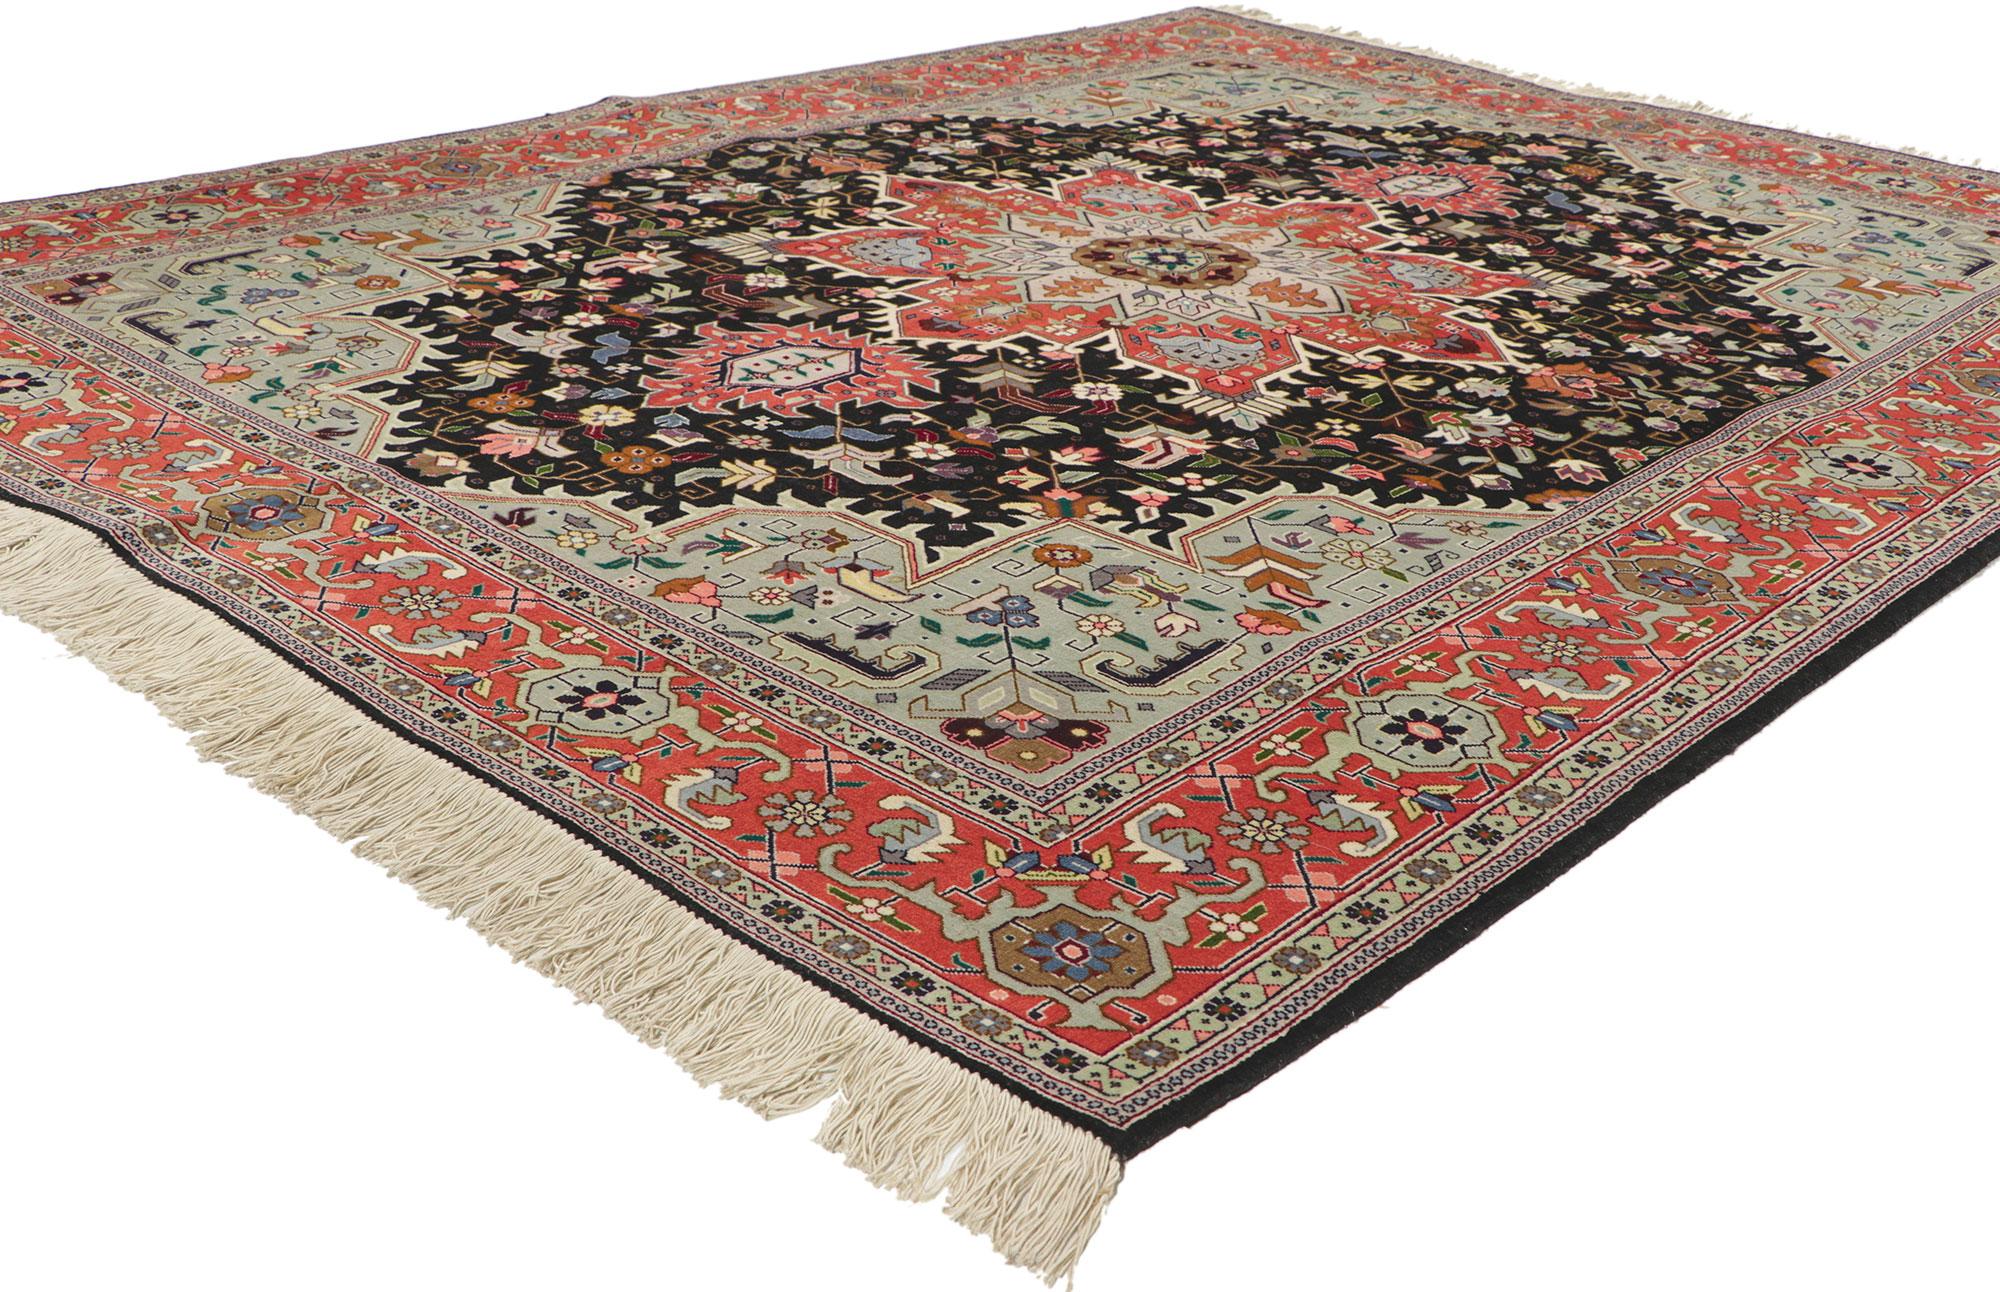 74651 Vintage Persian Tabriz Rug, 05’01 x 06’08. 
This striking rug features a star shaped central medallion with a geometric floral motif in steel, salmon, lavender and sage on a contrasting field of midnight corned by slate spandrels and bordered